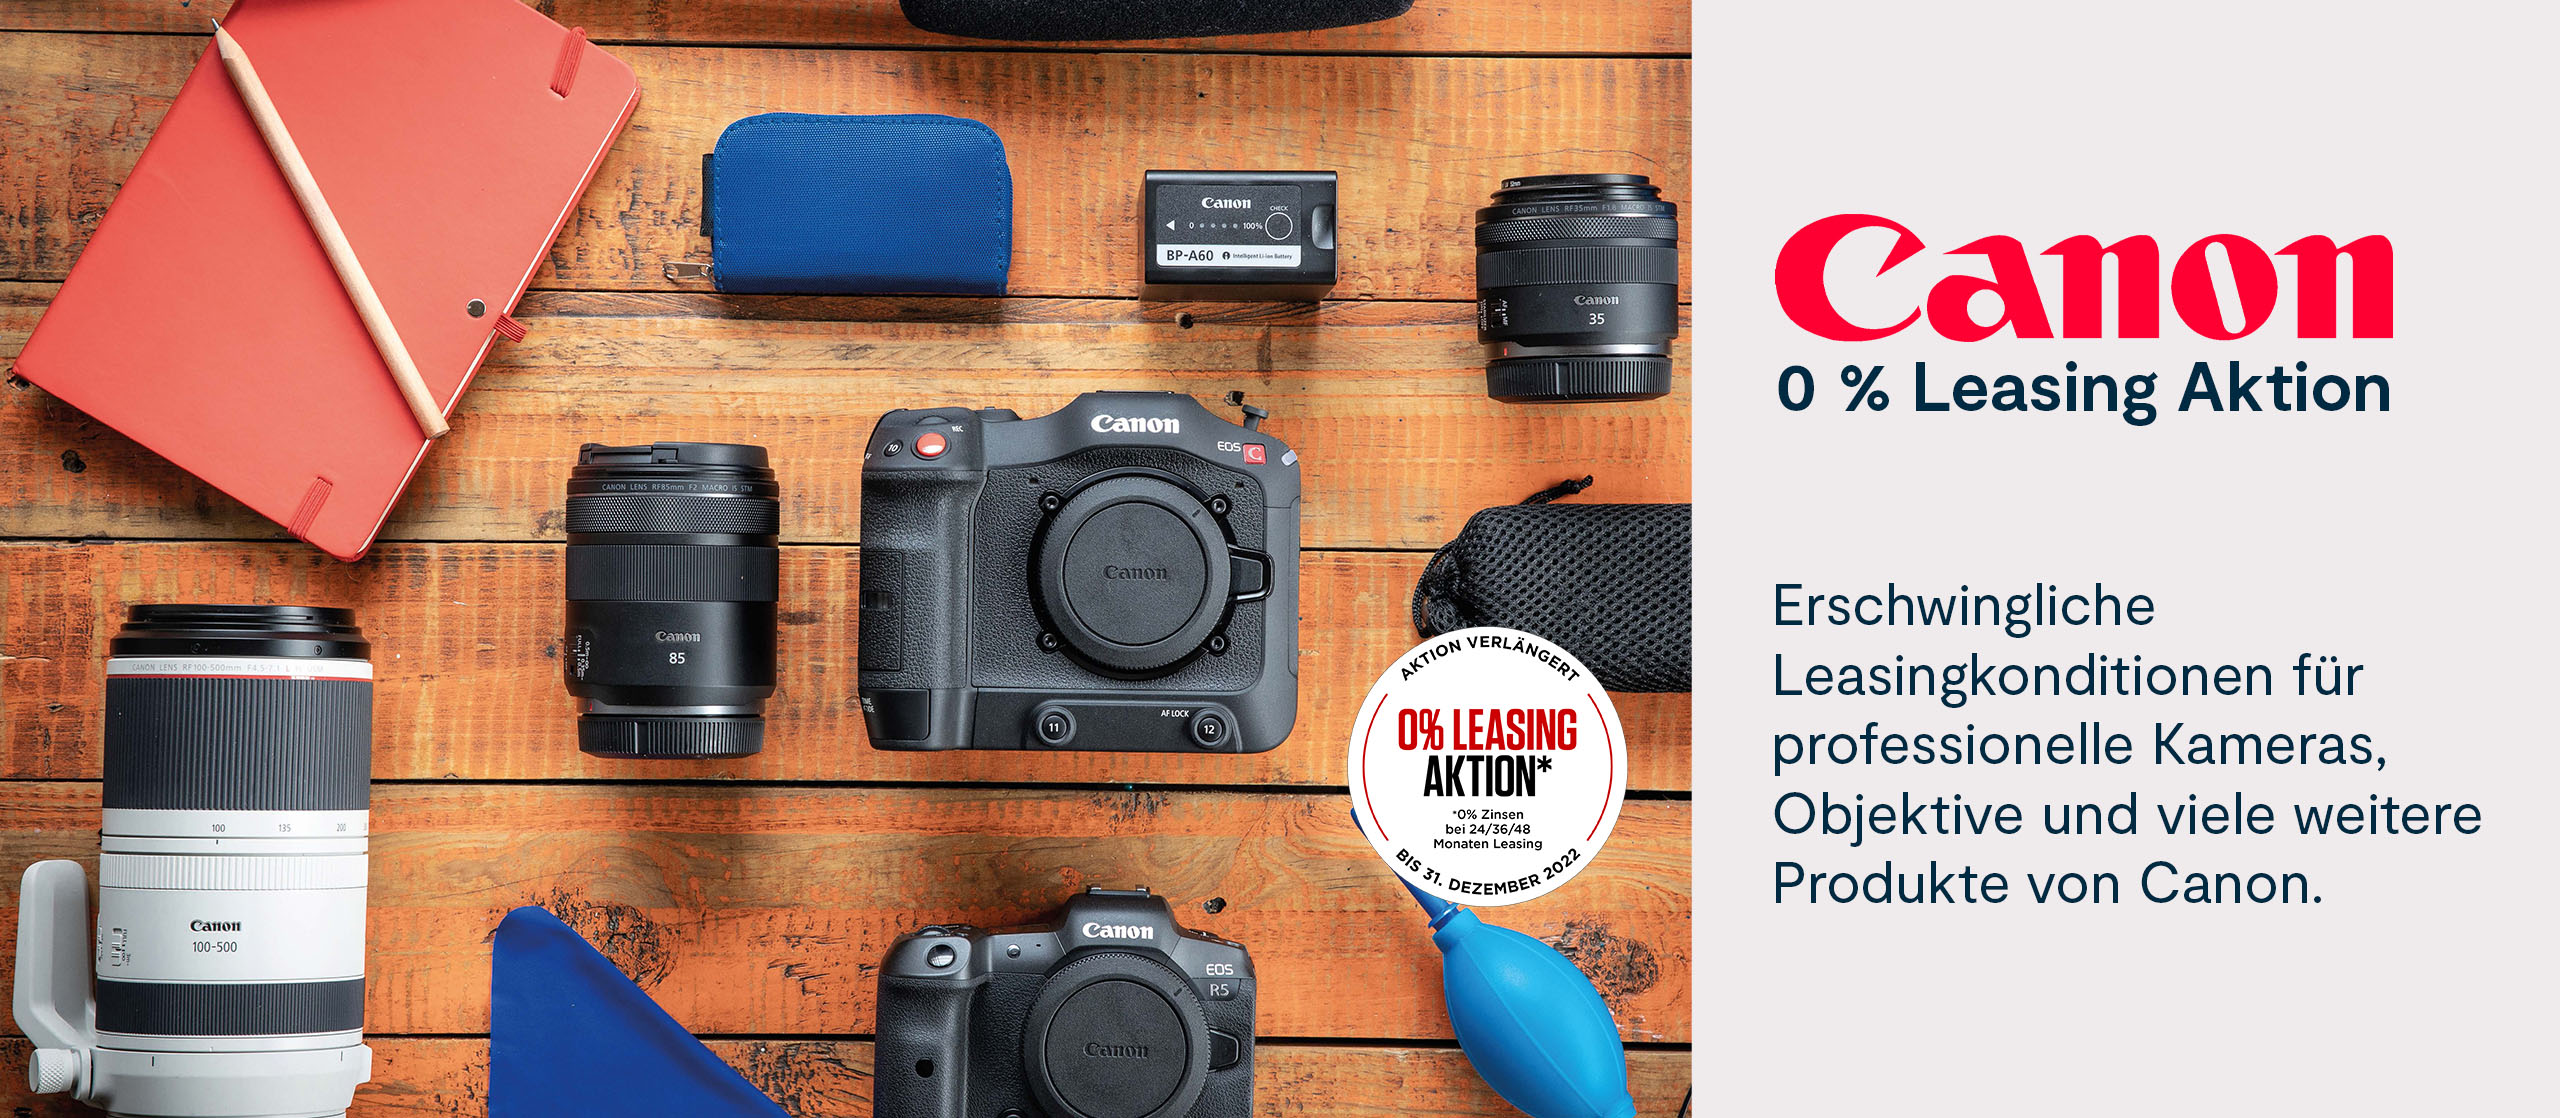 Canon 0 % Leasing Aktion